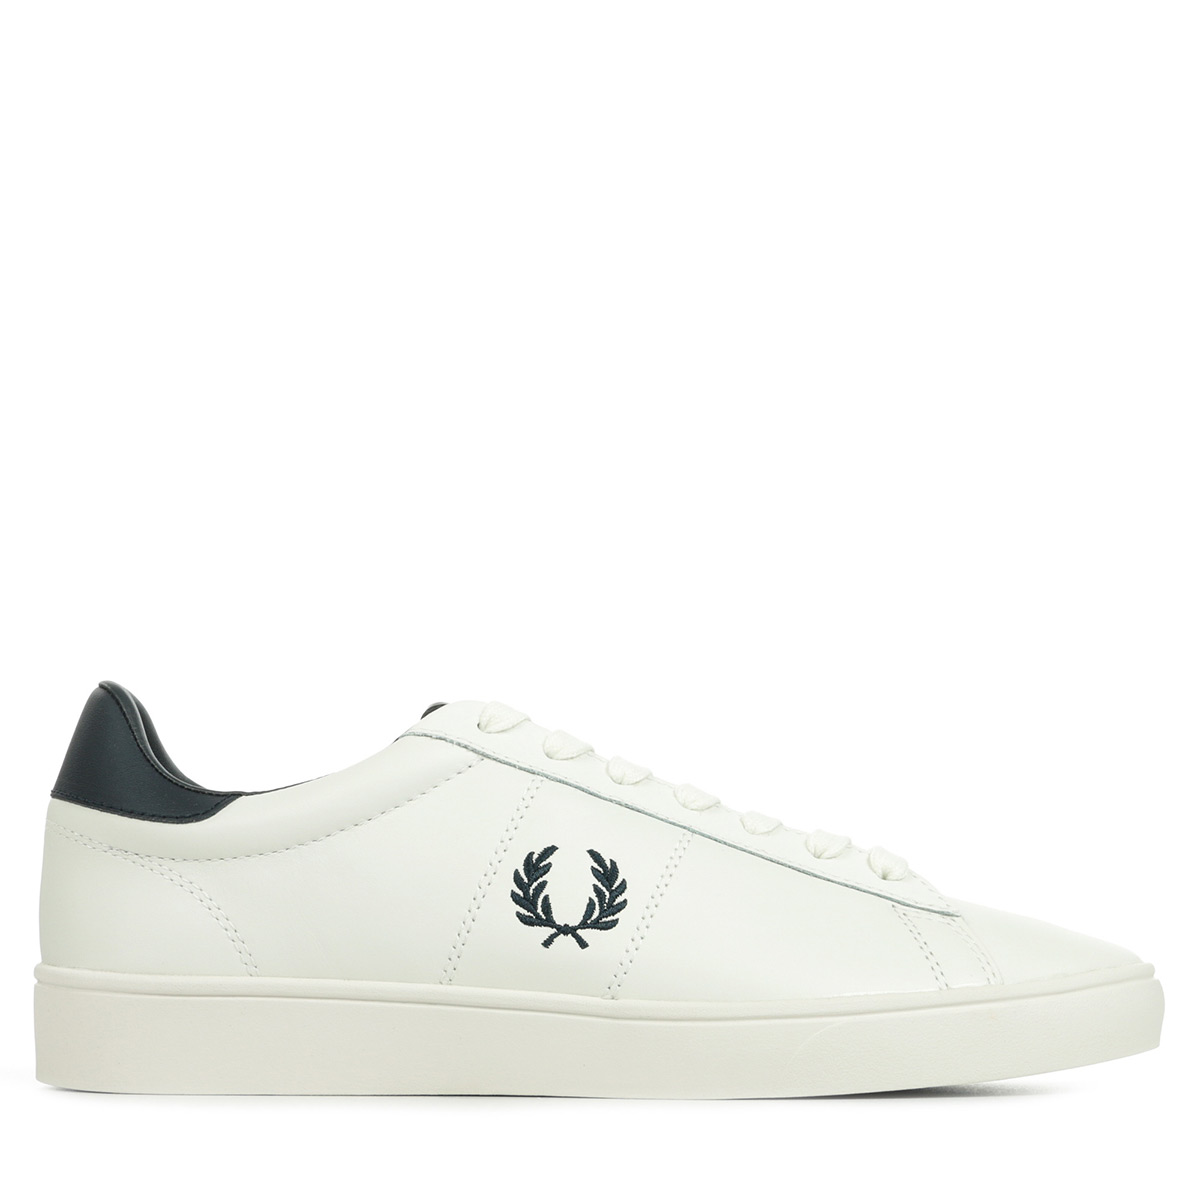 Fred Perry "Spencer Leather"